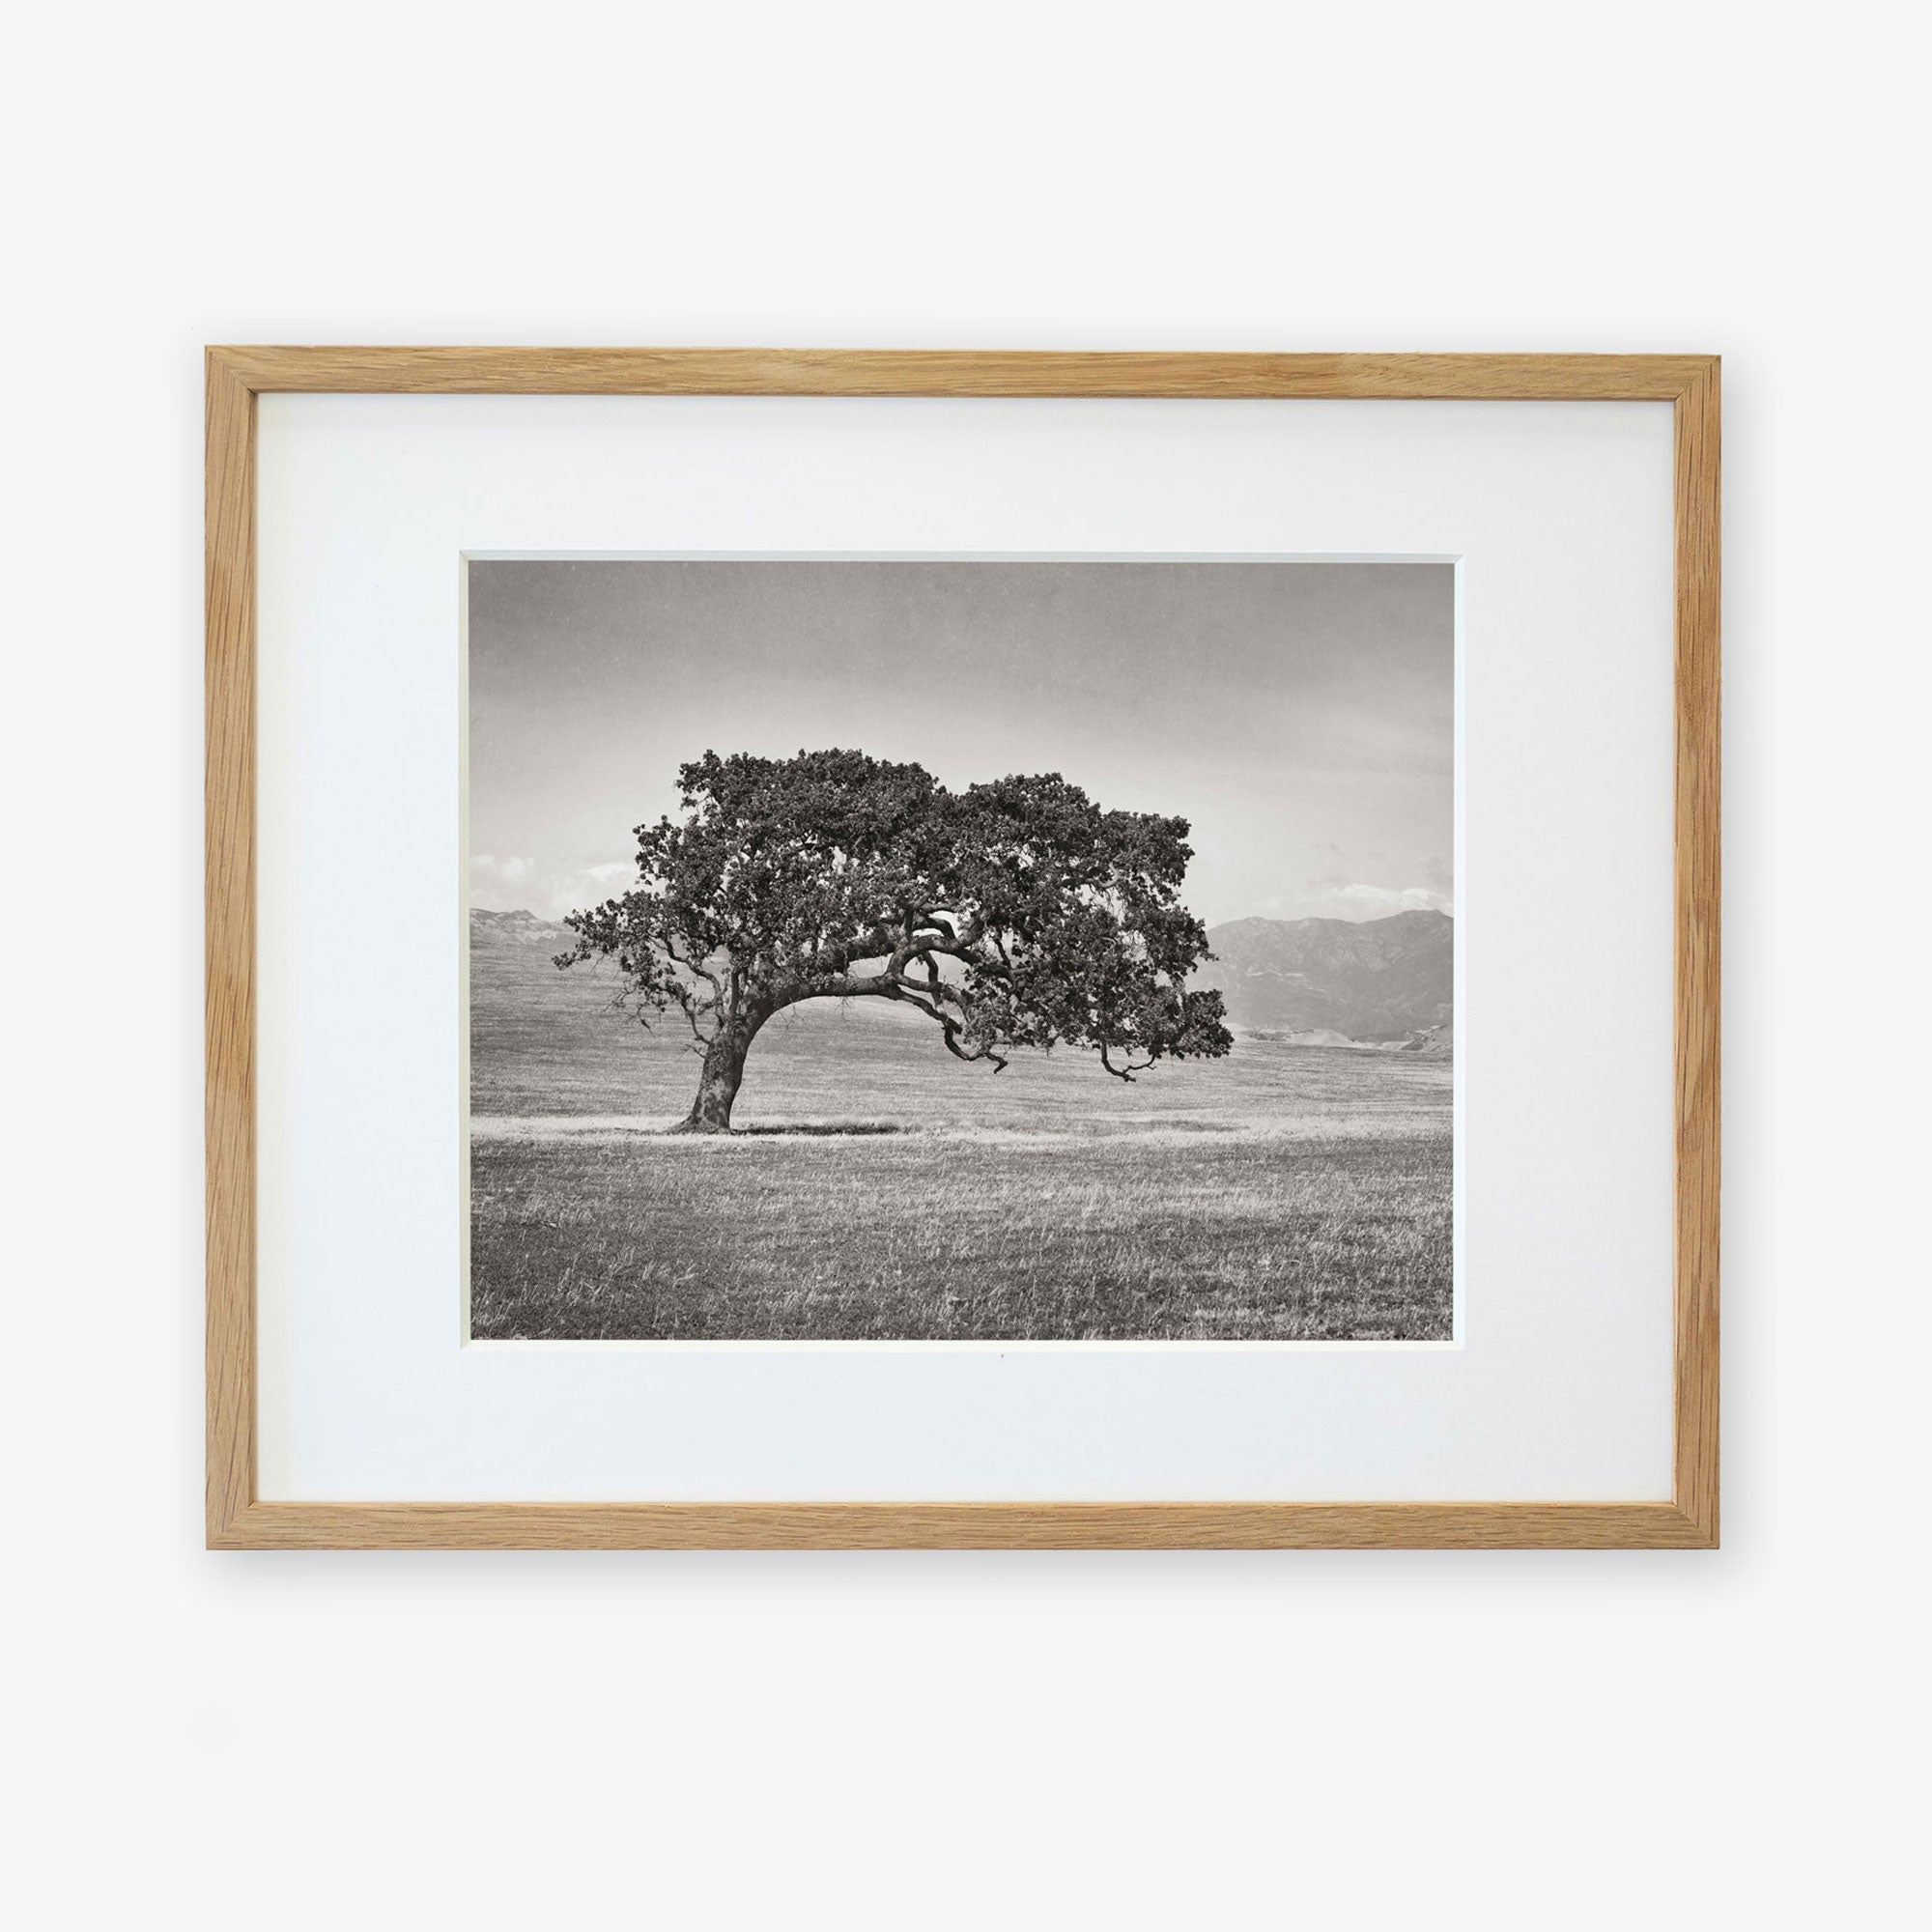 Black and white photograph of a solitary Offley Green 'Windswept (Black and White)' Californian Oak Tree Landscape in a grassy field framed in a light wooden frame, hung on a white wall.